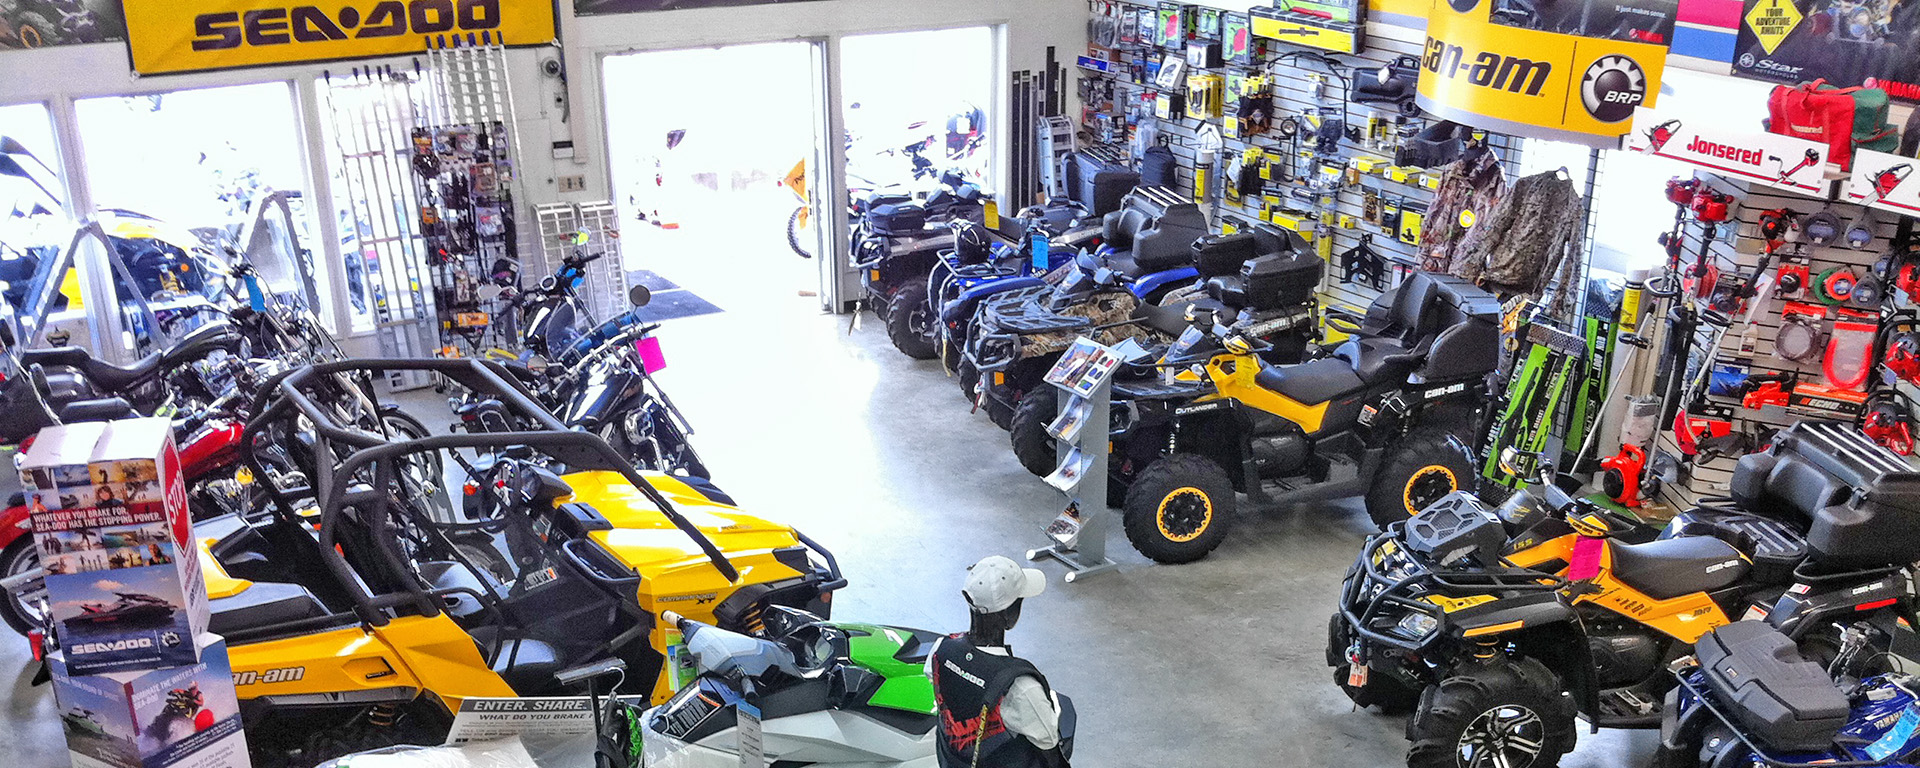 Showroom at Playmor Power products, showing a selection of snowmobiles and ATVs 